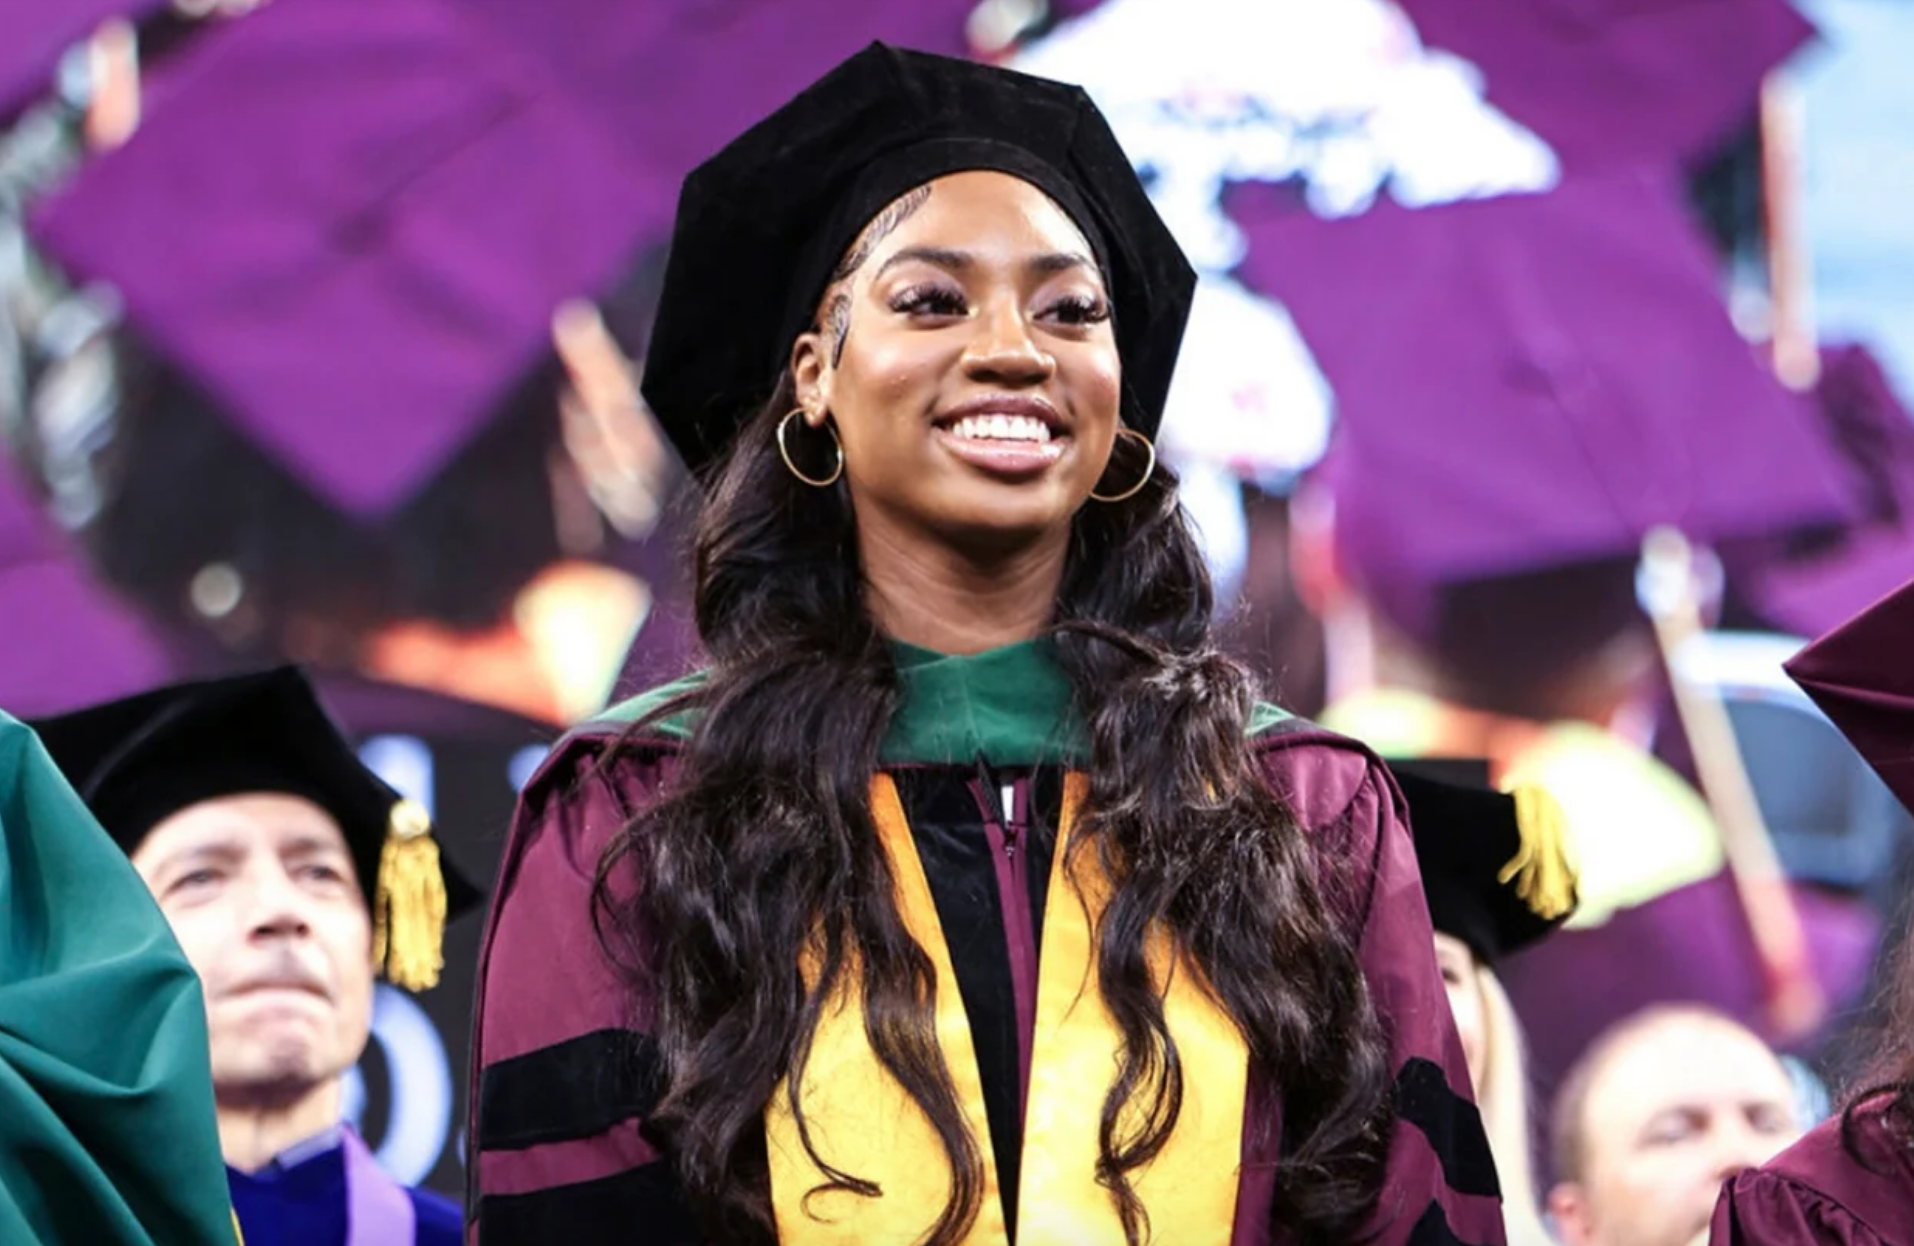 Chicago Teen Makes History as The Youngest Person in The US to Earn a Doctoral Degree